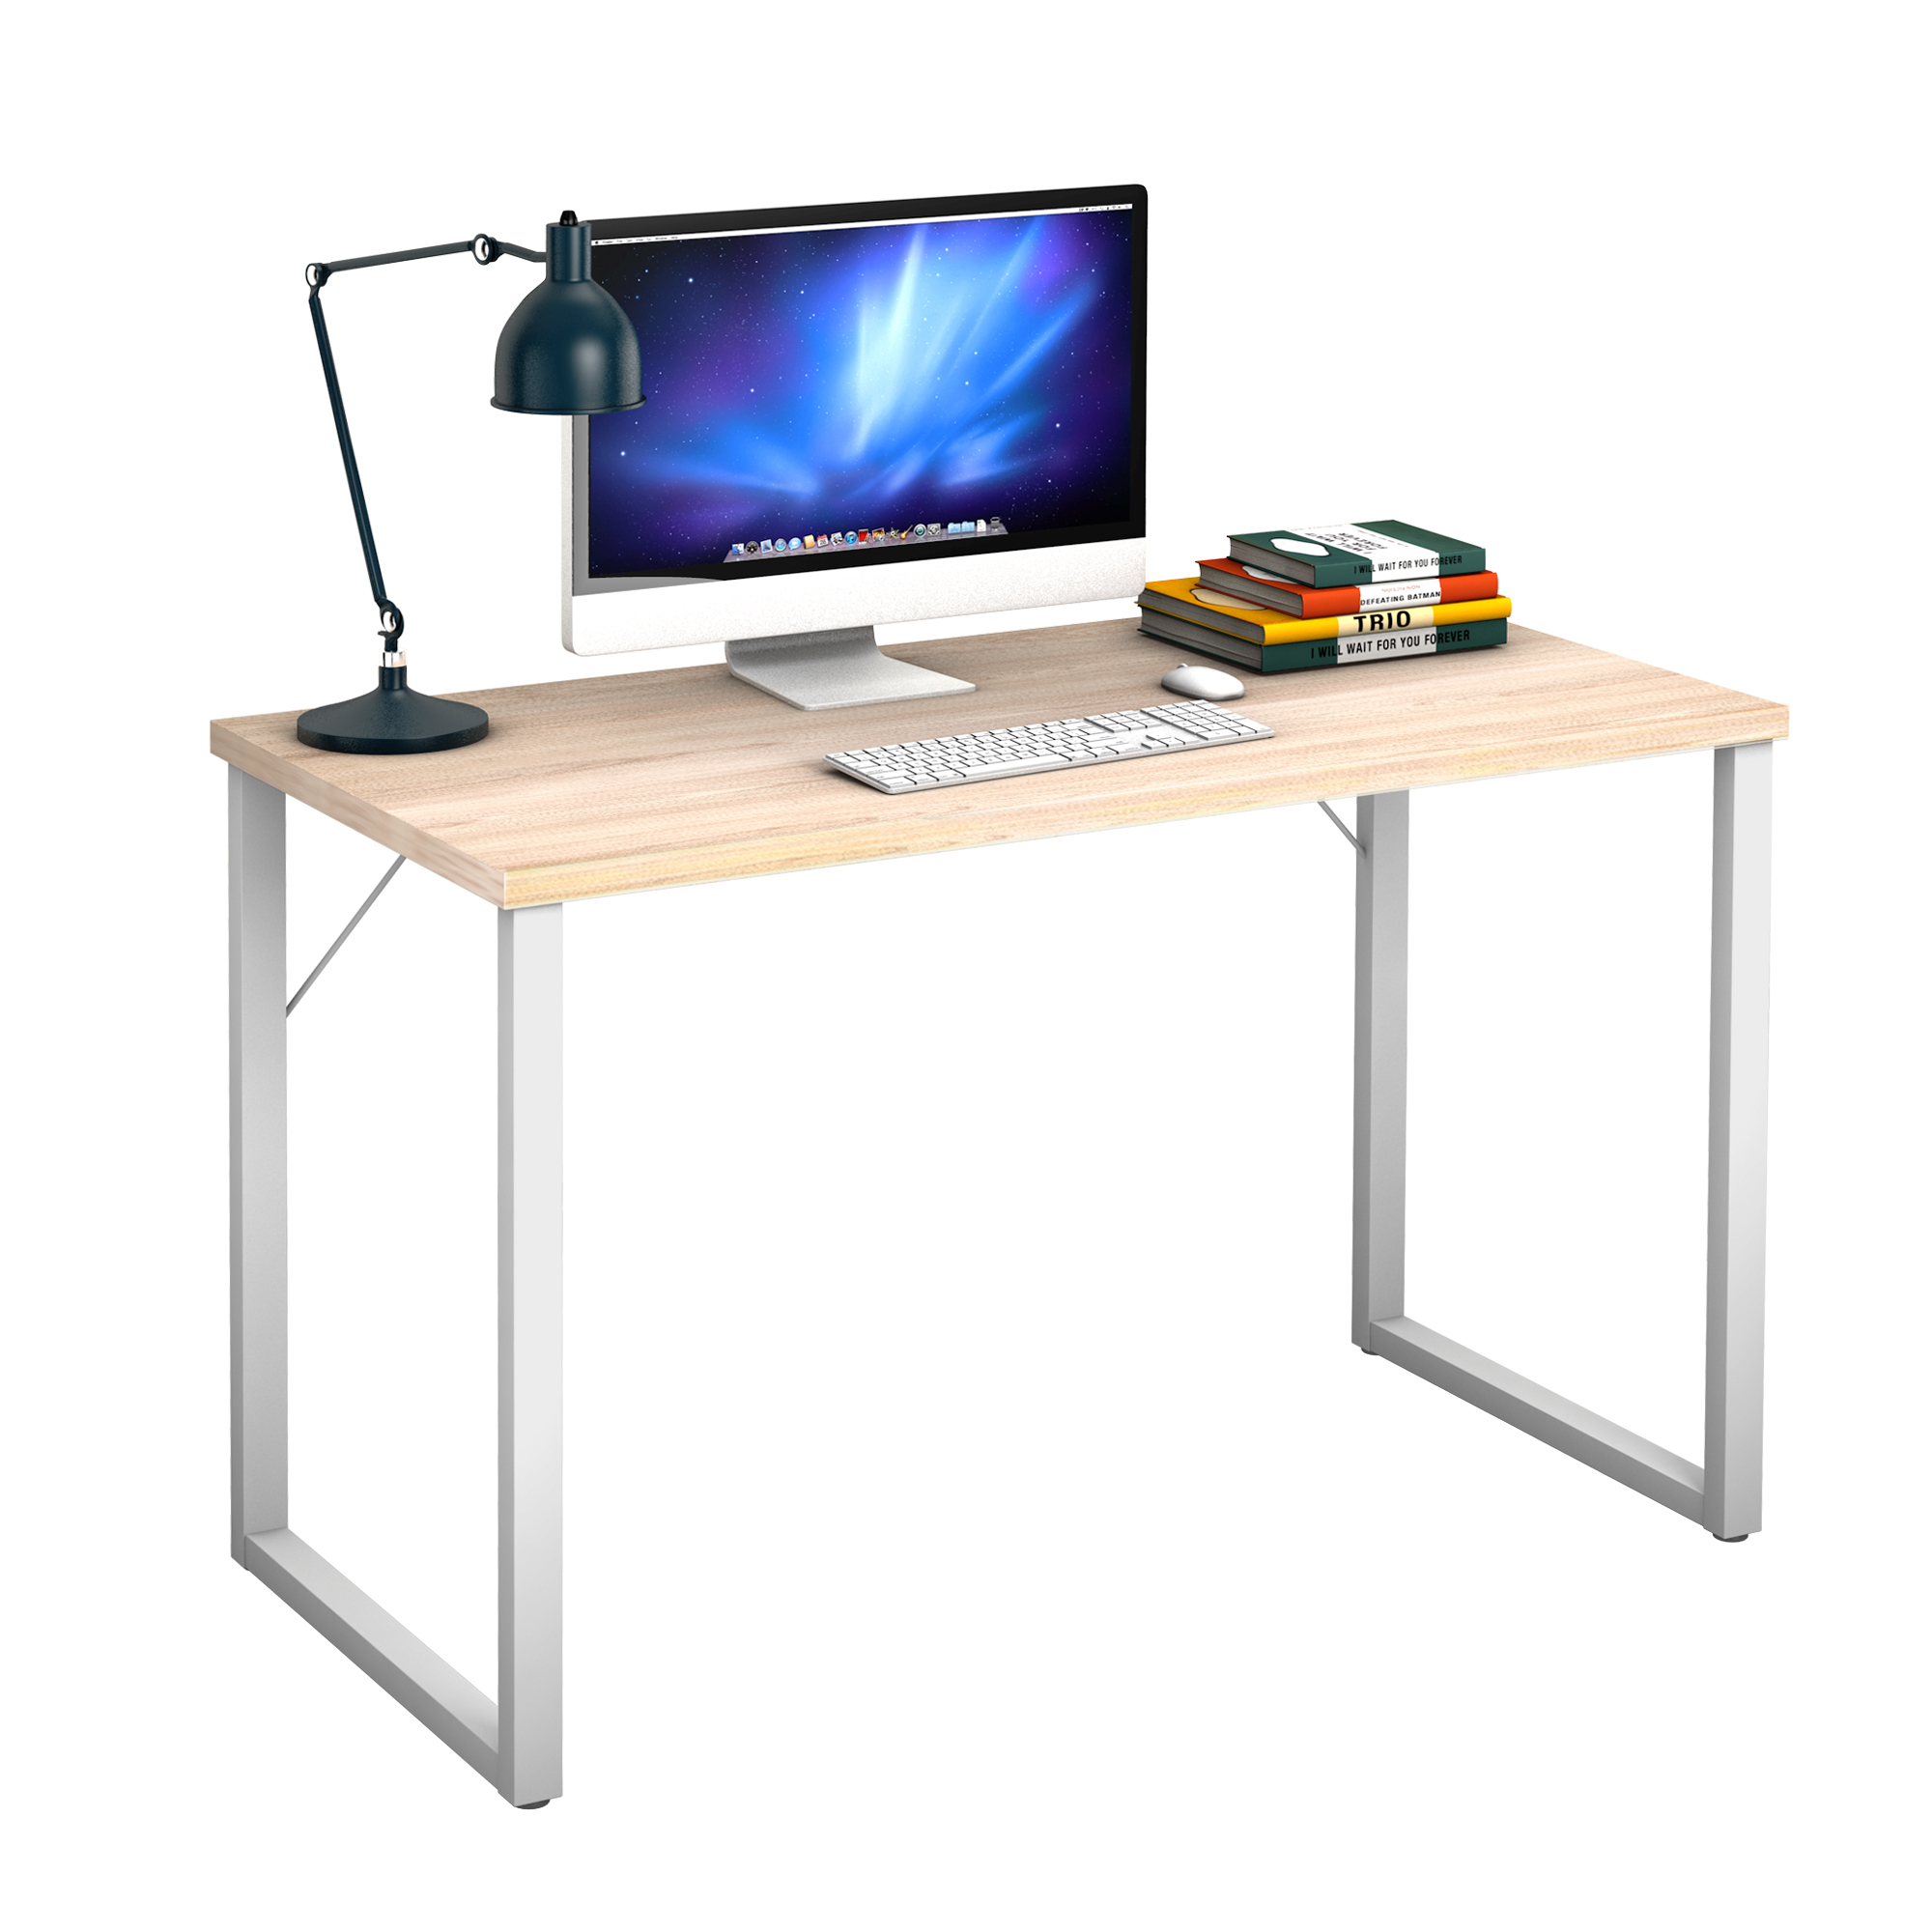 Sturdy Horse Shape Computer Office Table Writing Desk PC Laptop Home Office Use